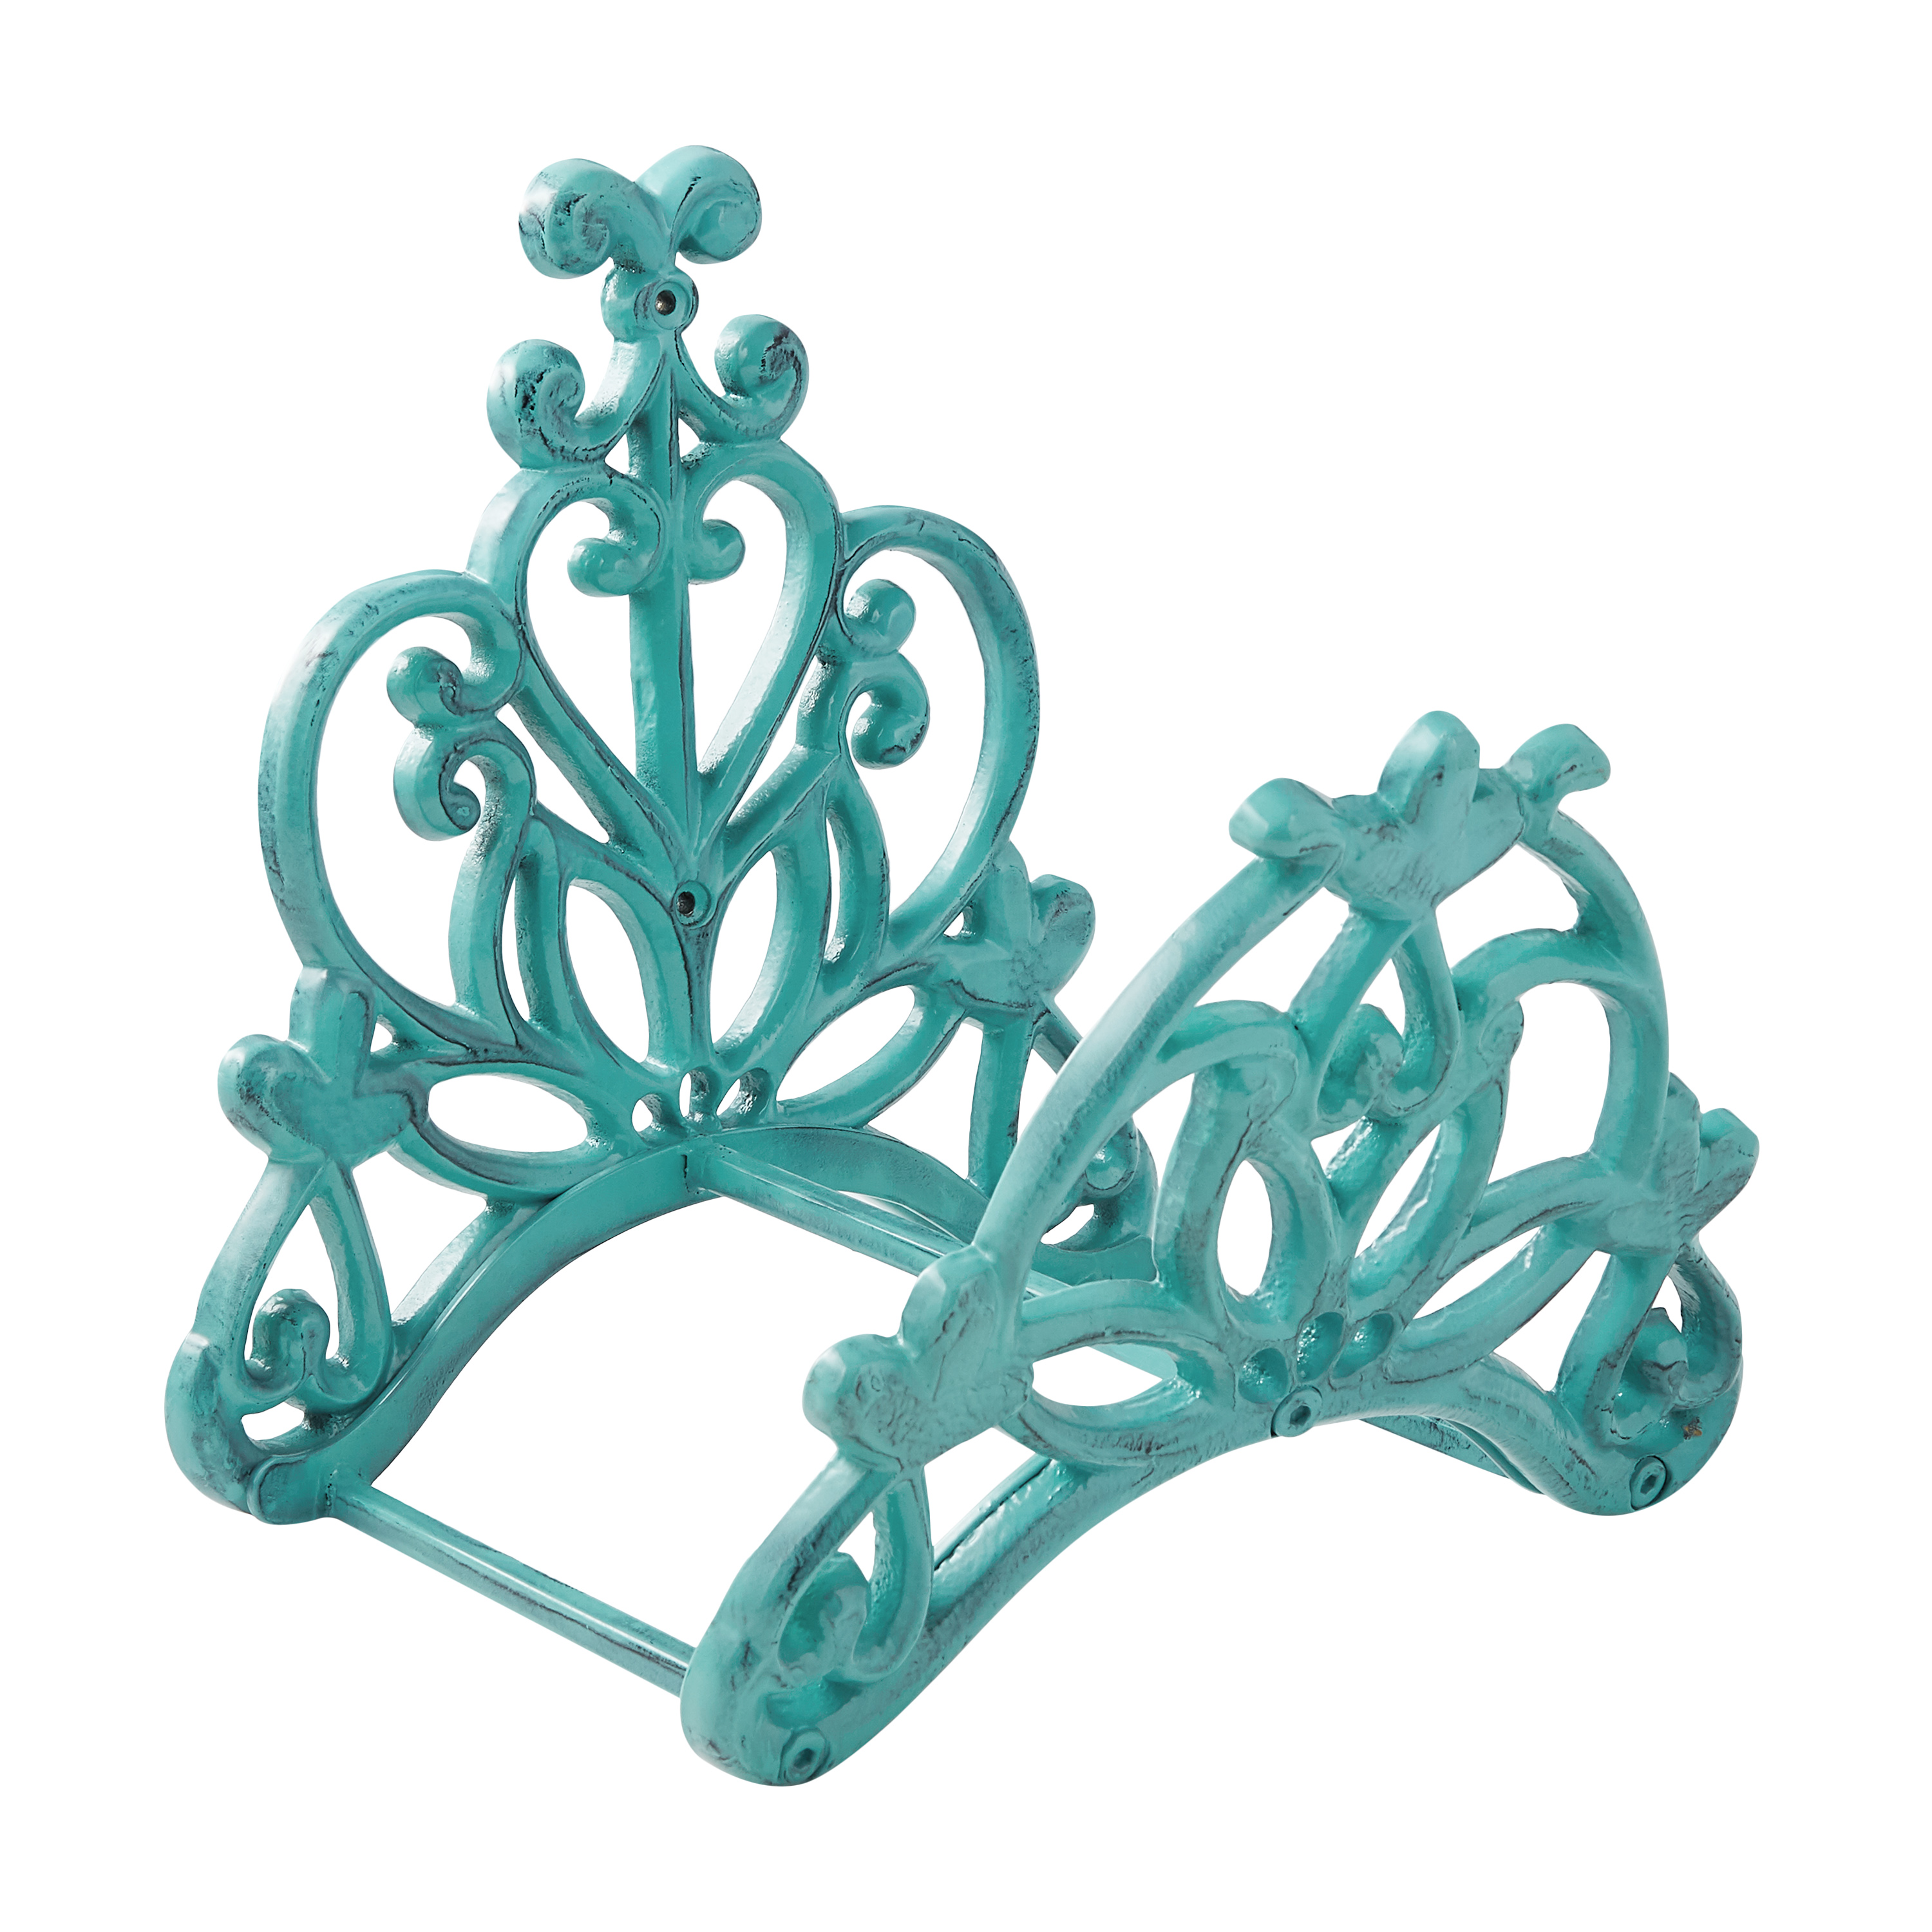 The Pioneer Woman Goldie Decorative Hose Hanger, Teal - image 4 of 7